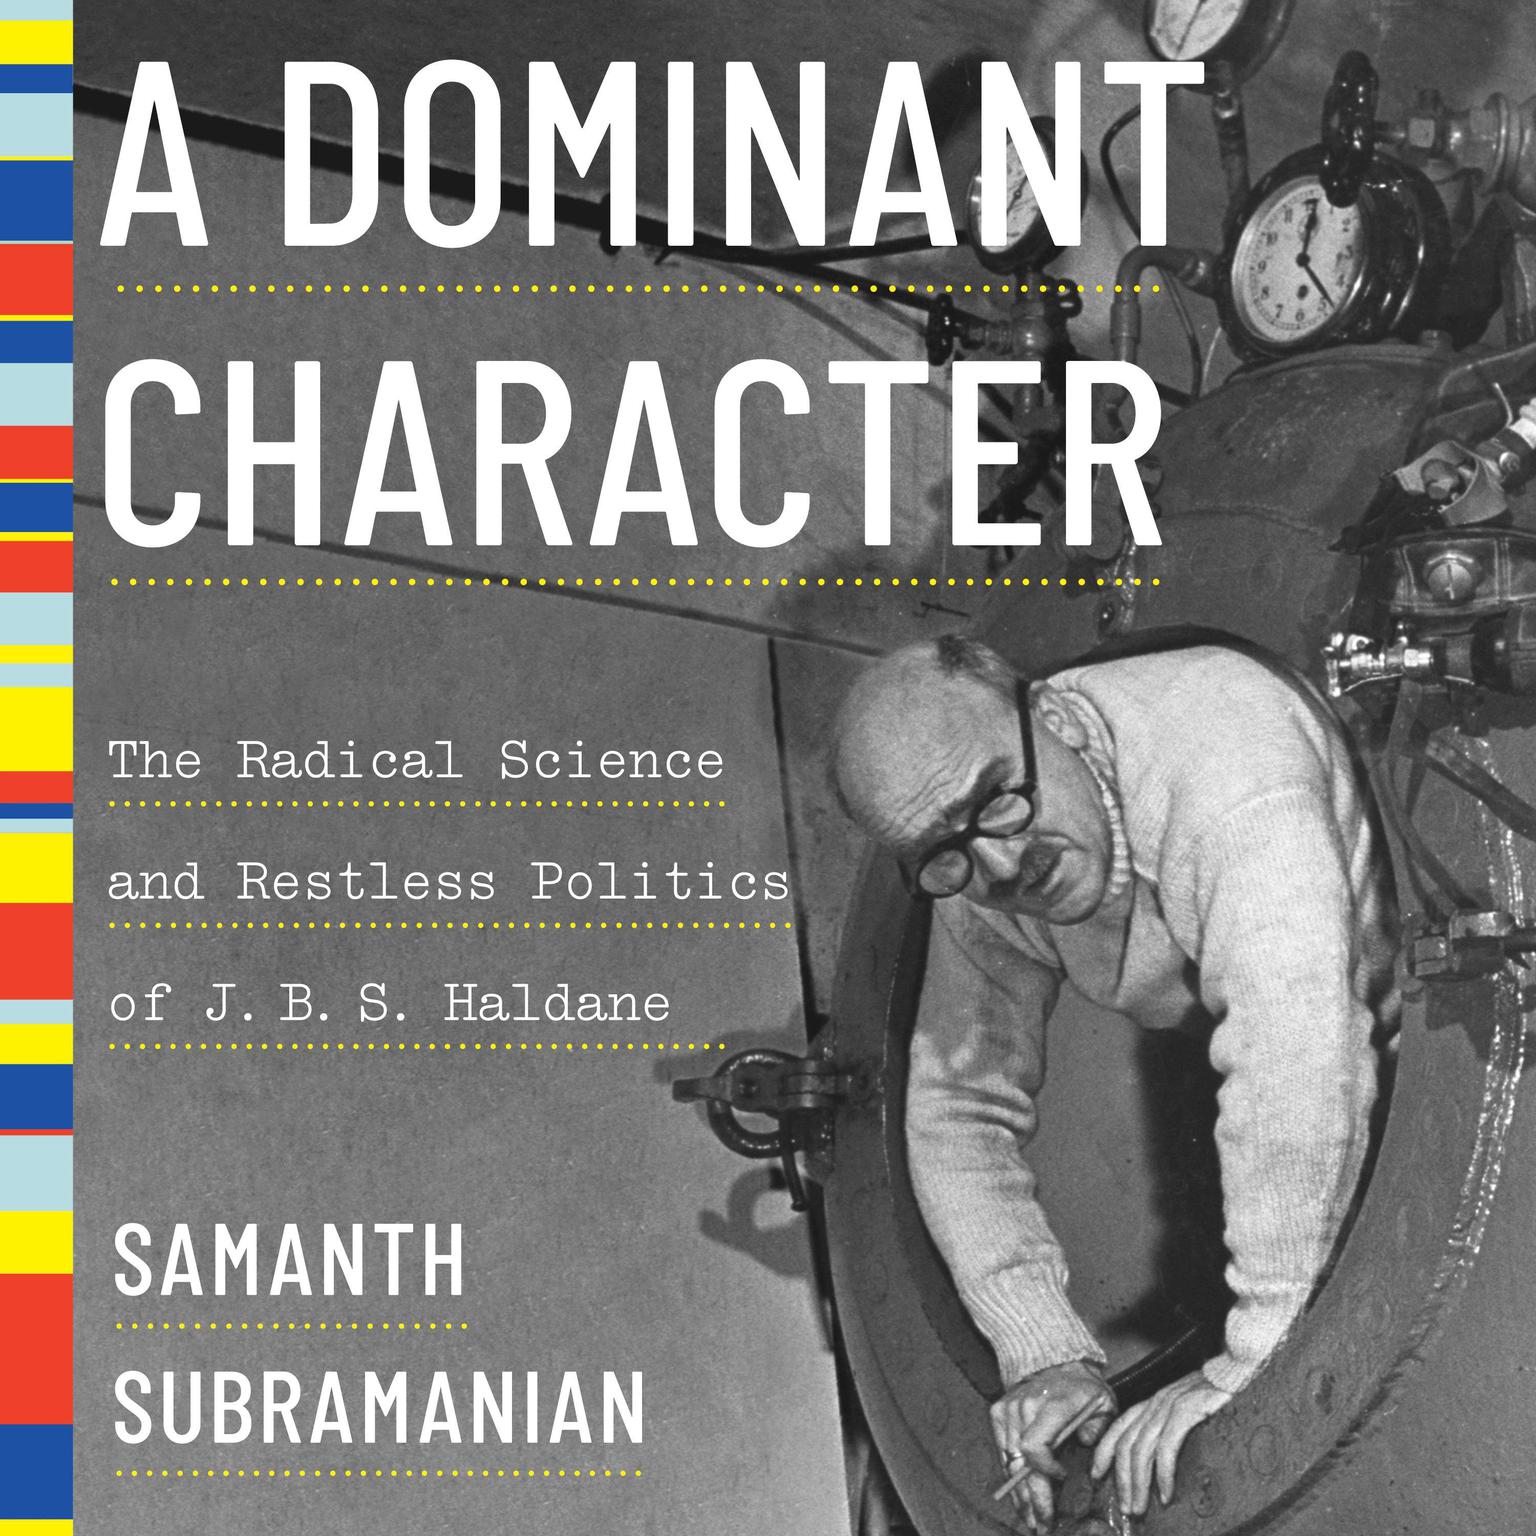 A Dominant Character: The Radical Science and Restless Politics of J.B.S. Haldane Audiobook, by Samanth Subramanian